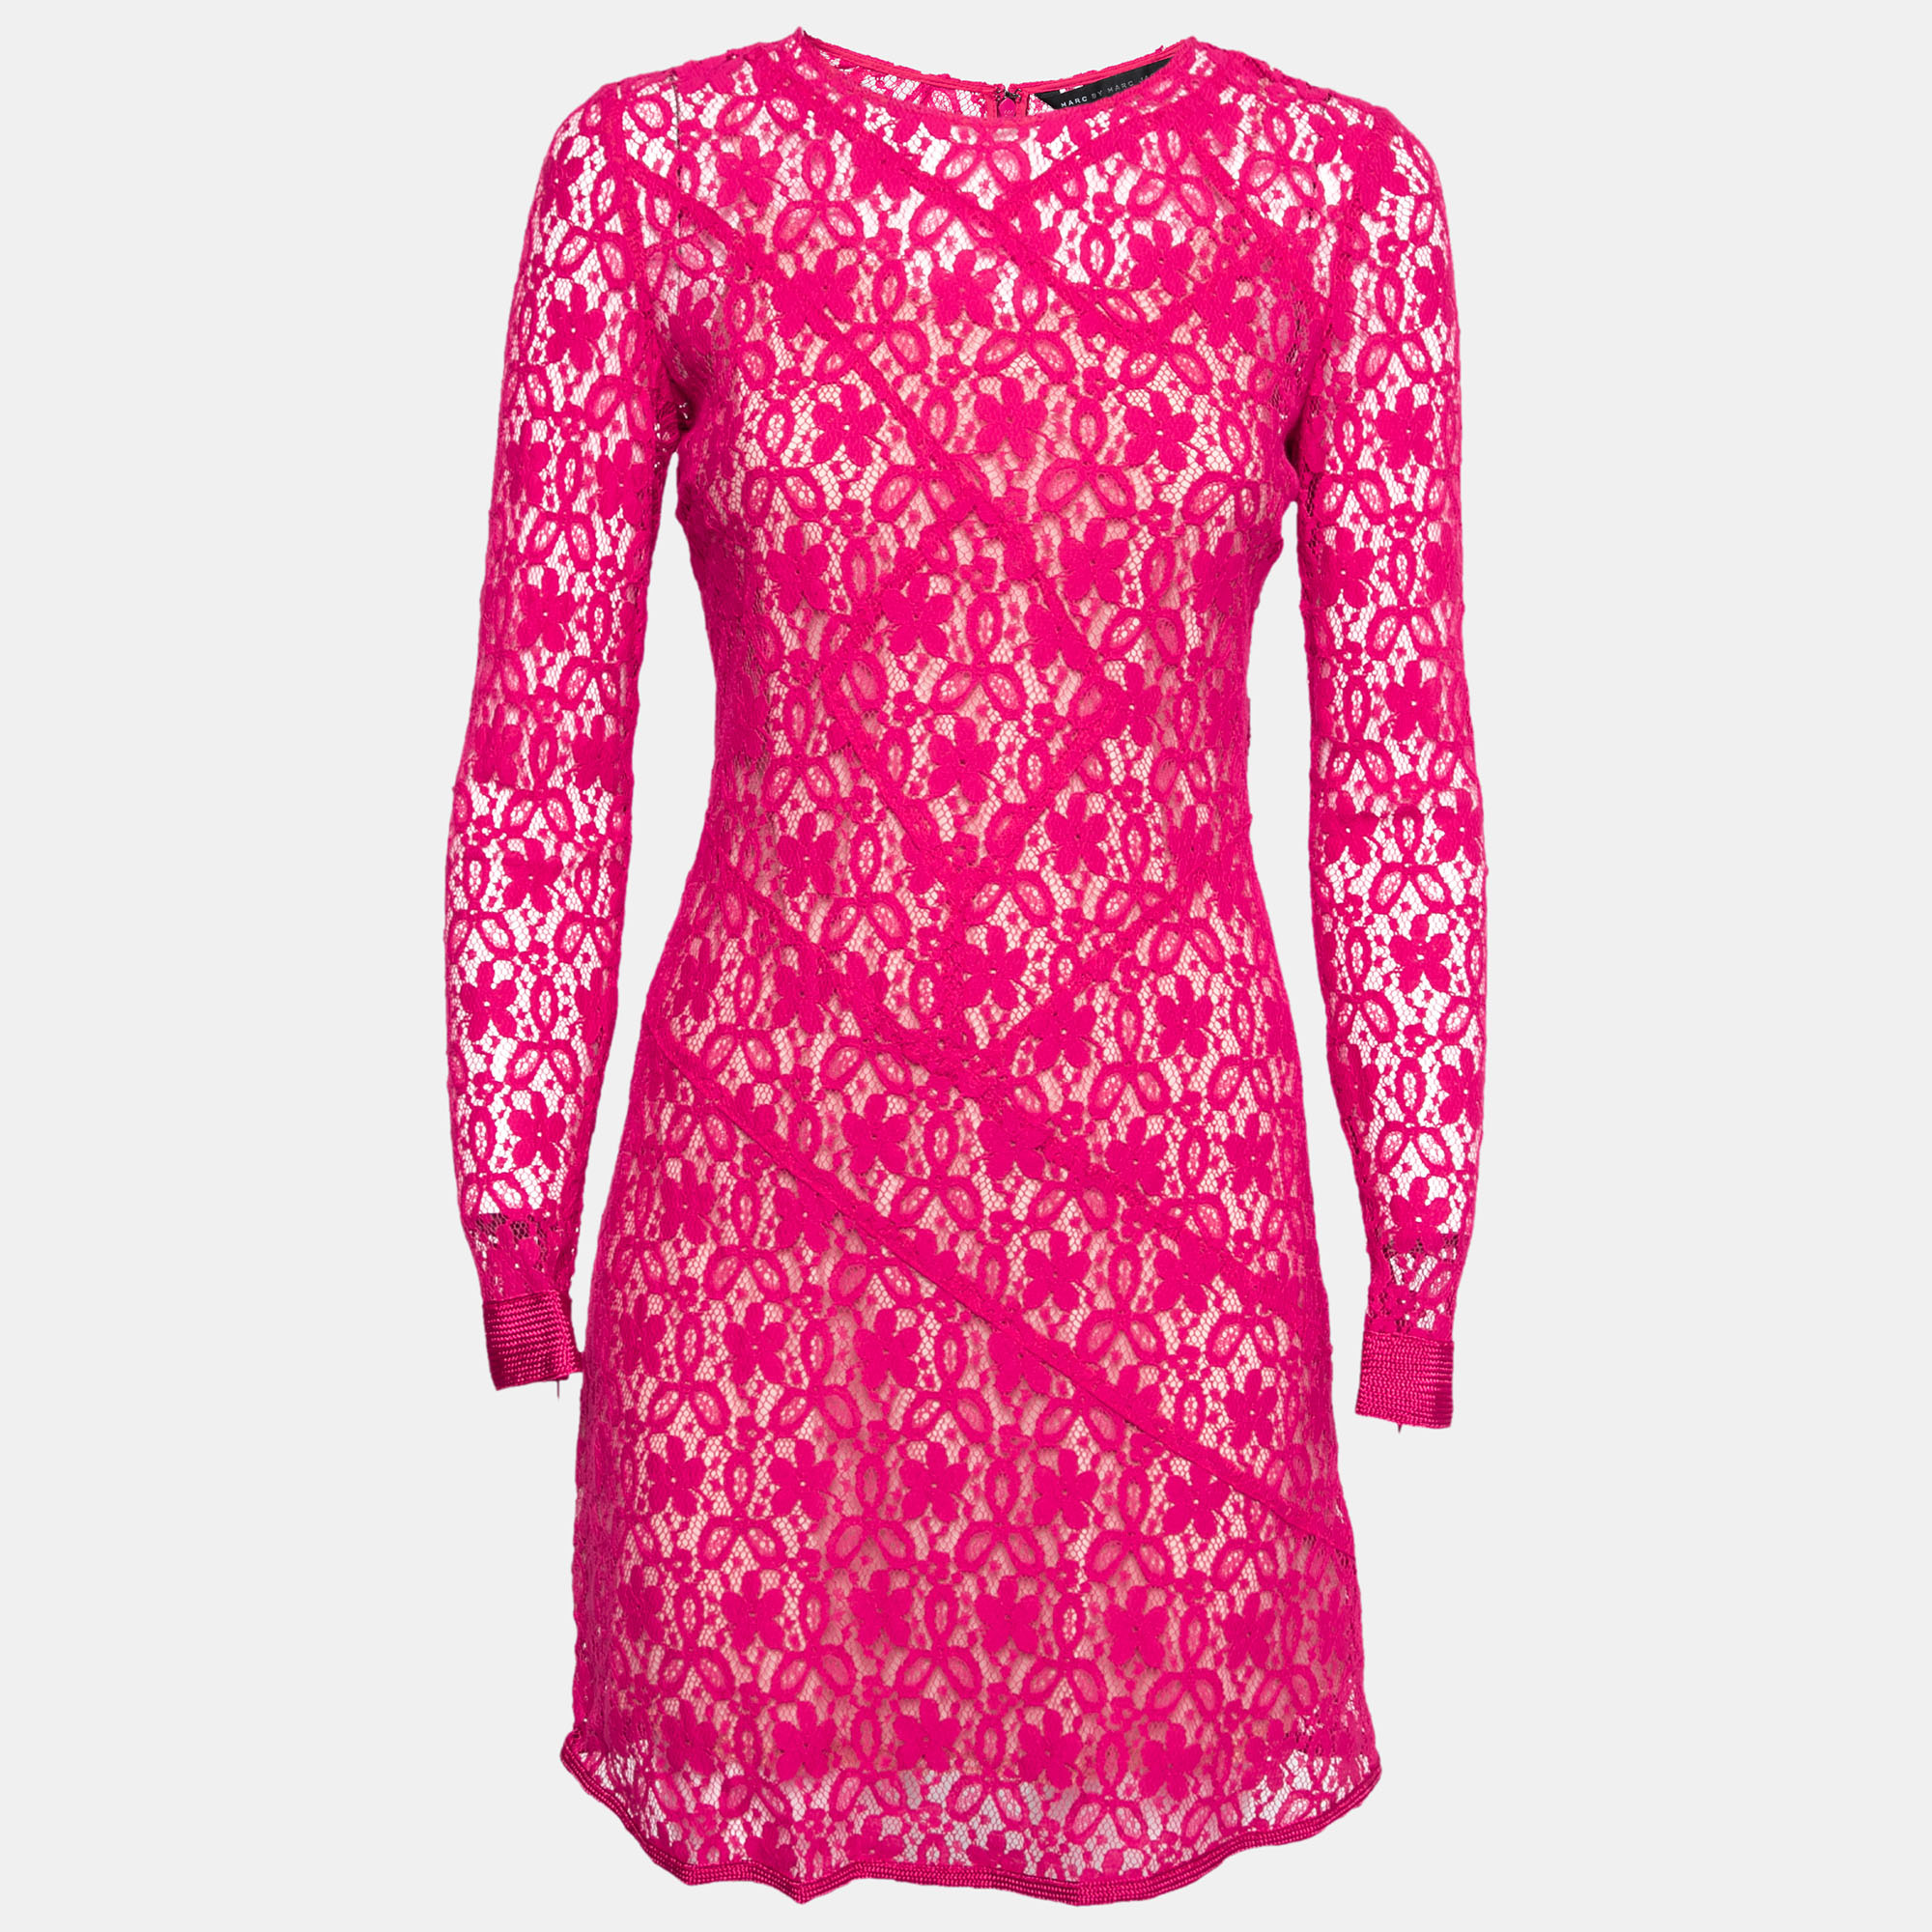 

Marc by Marc Jacobs Strawberry Daiquiri Floral Lace Paneled Leila Dress S, Pink